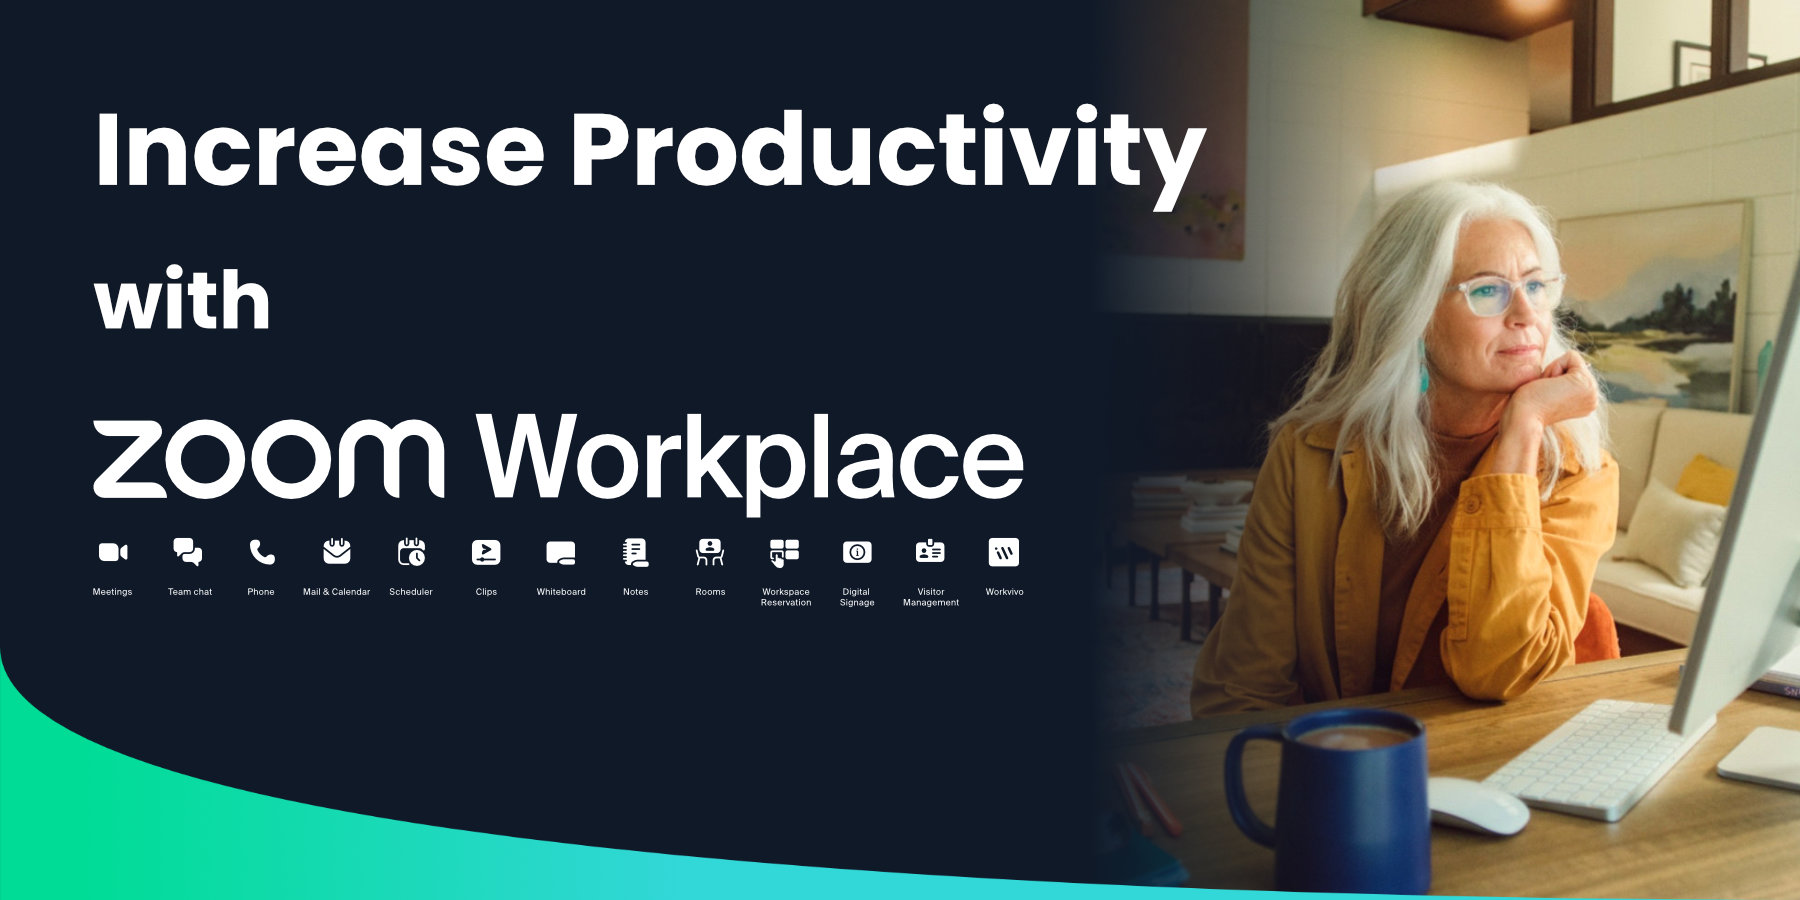 Featured image for “Increase Productivity with Zoom Workplace”